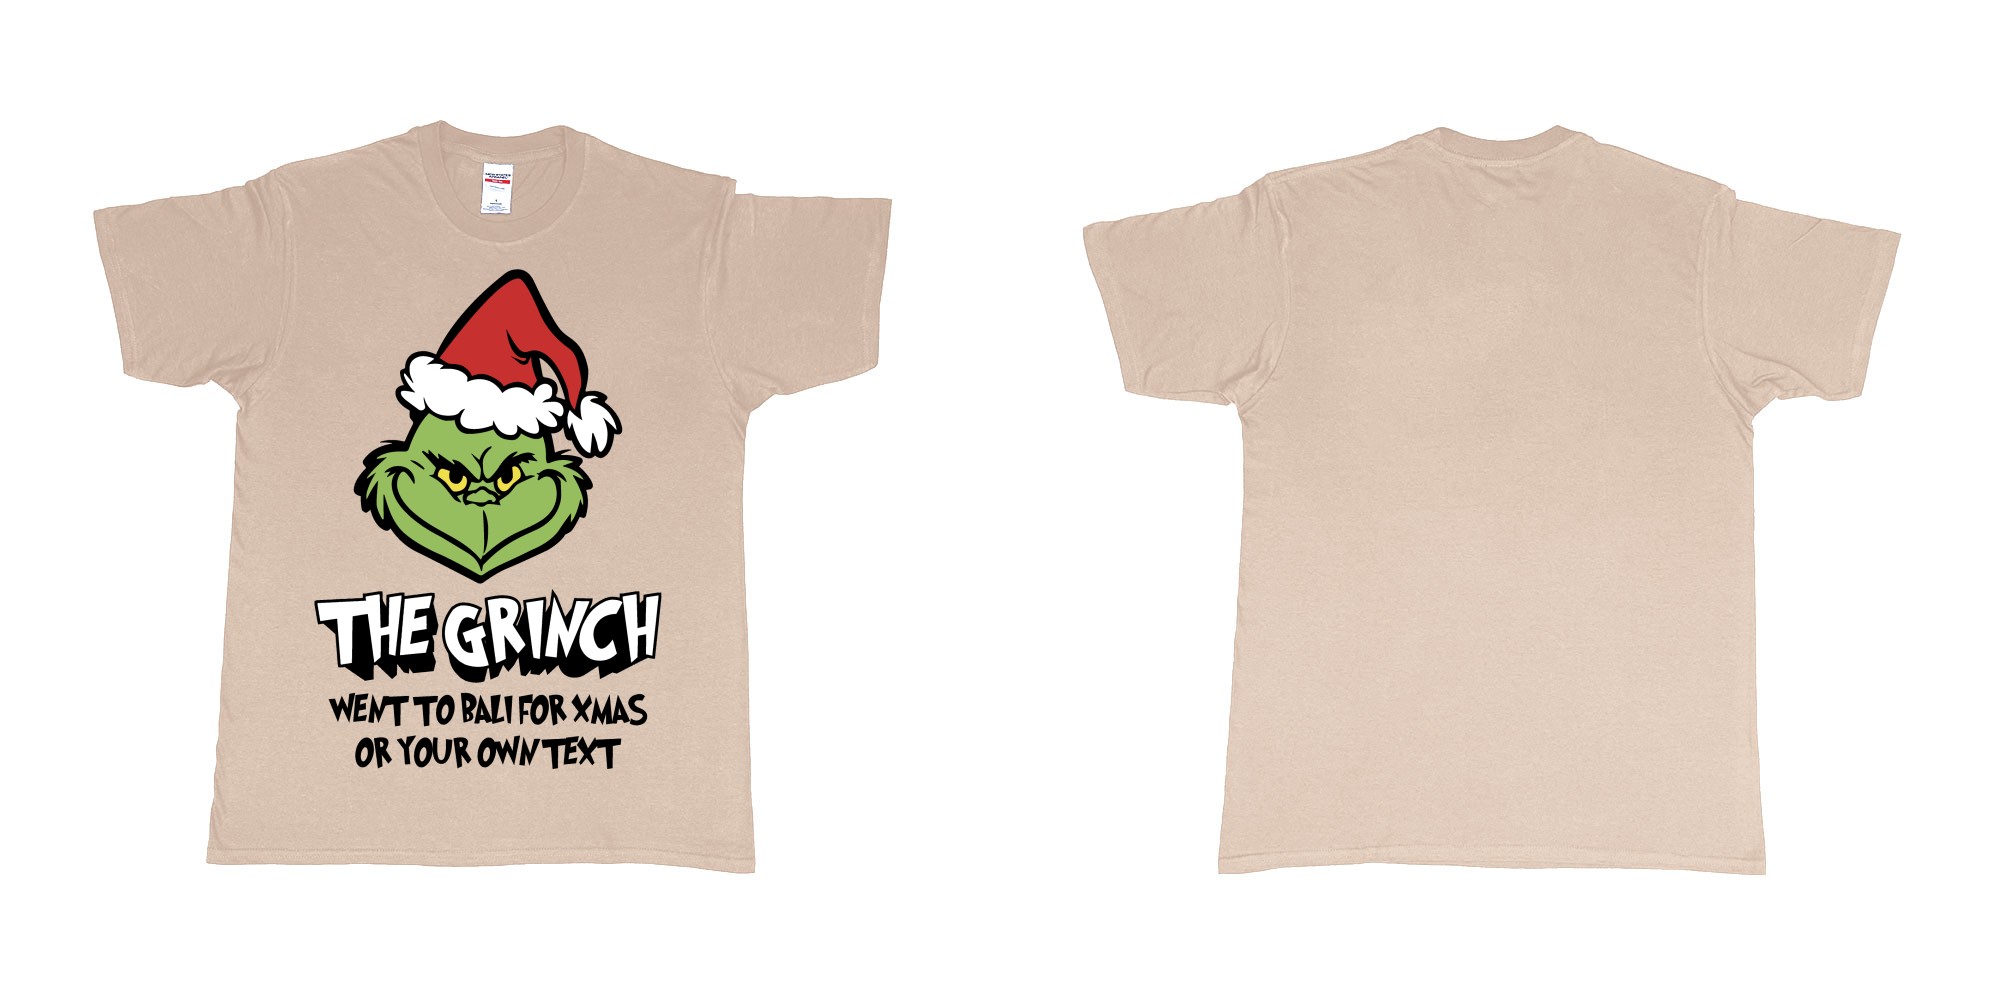 Custom tshirt design the grinch went to bali for xmas tshirt in fabric color sand choice your own text made in Bali by The Pirate Way